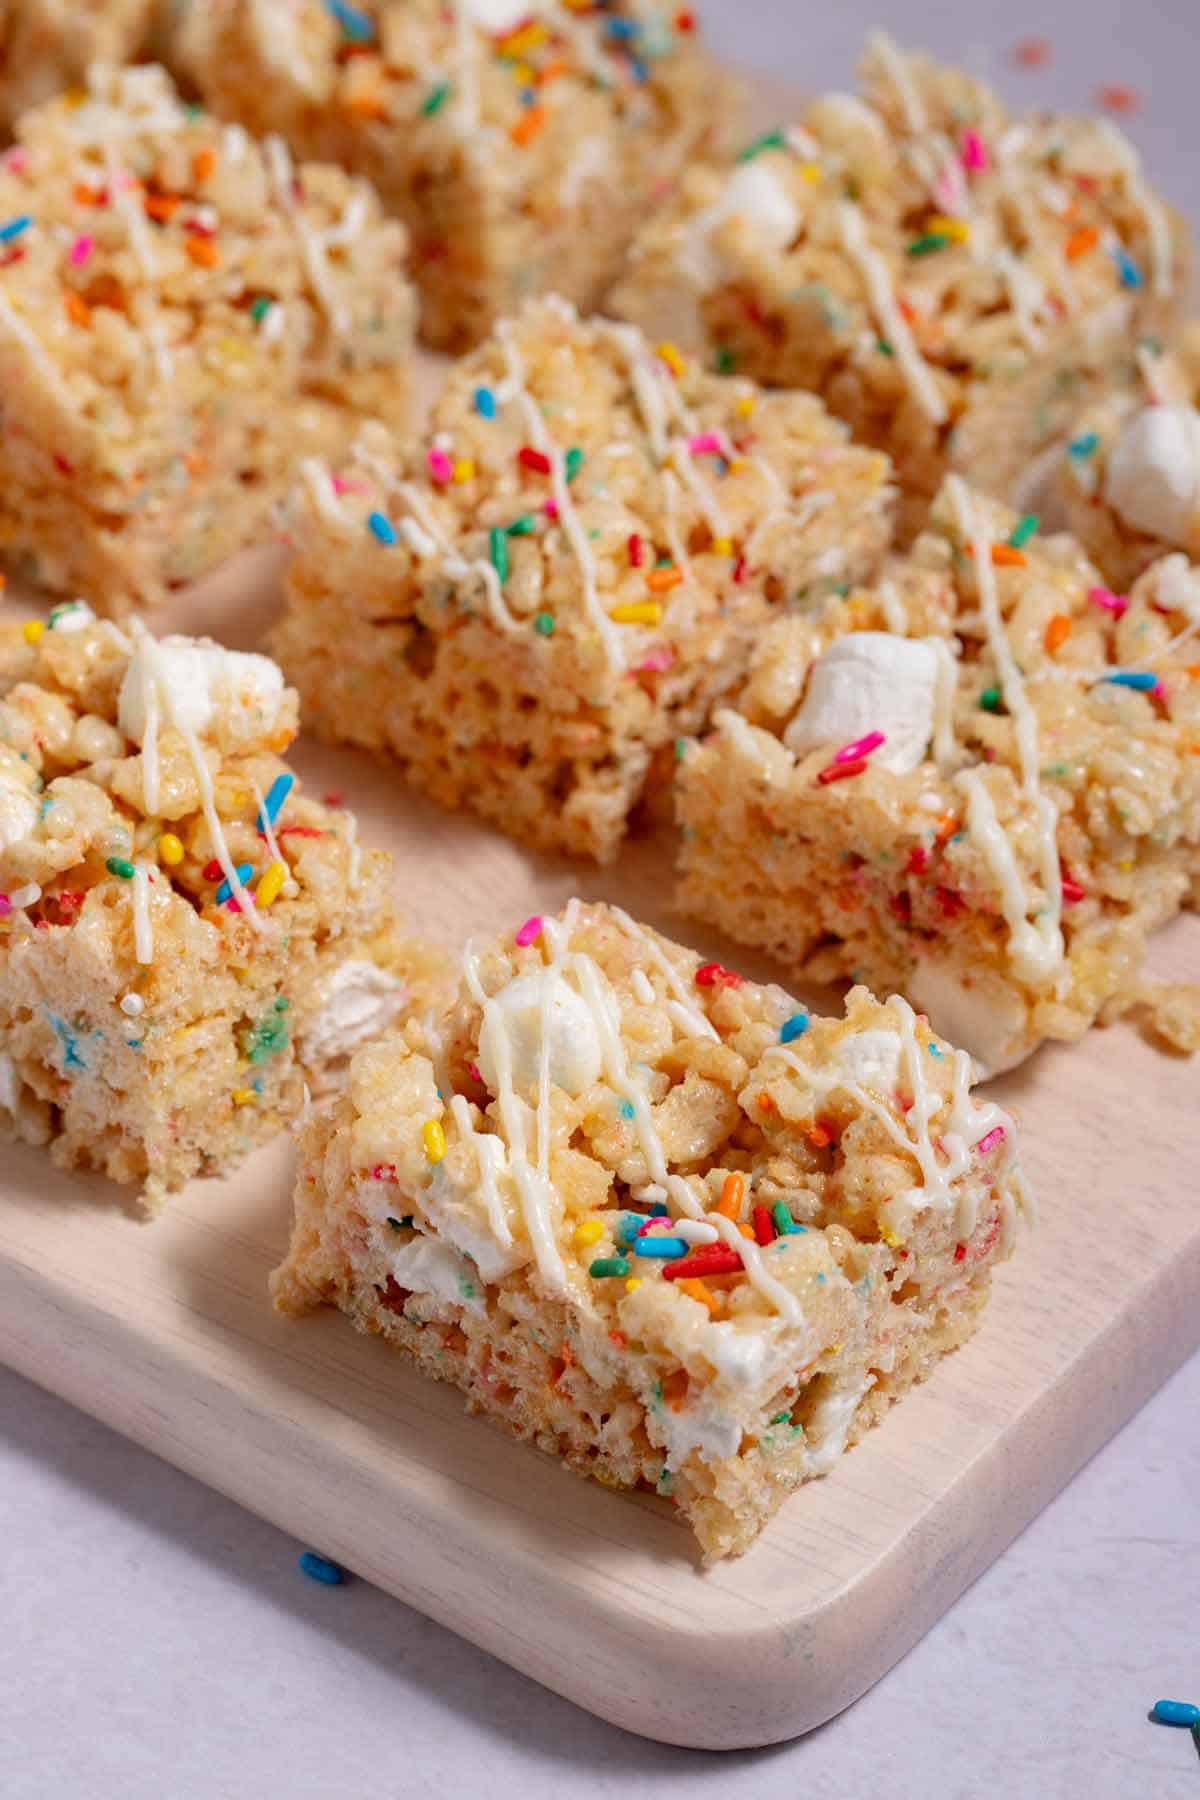 Cutting board filled with leftover birthday cake Rice Krispies treats, cut and drizzled with white chocolate.